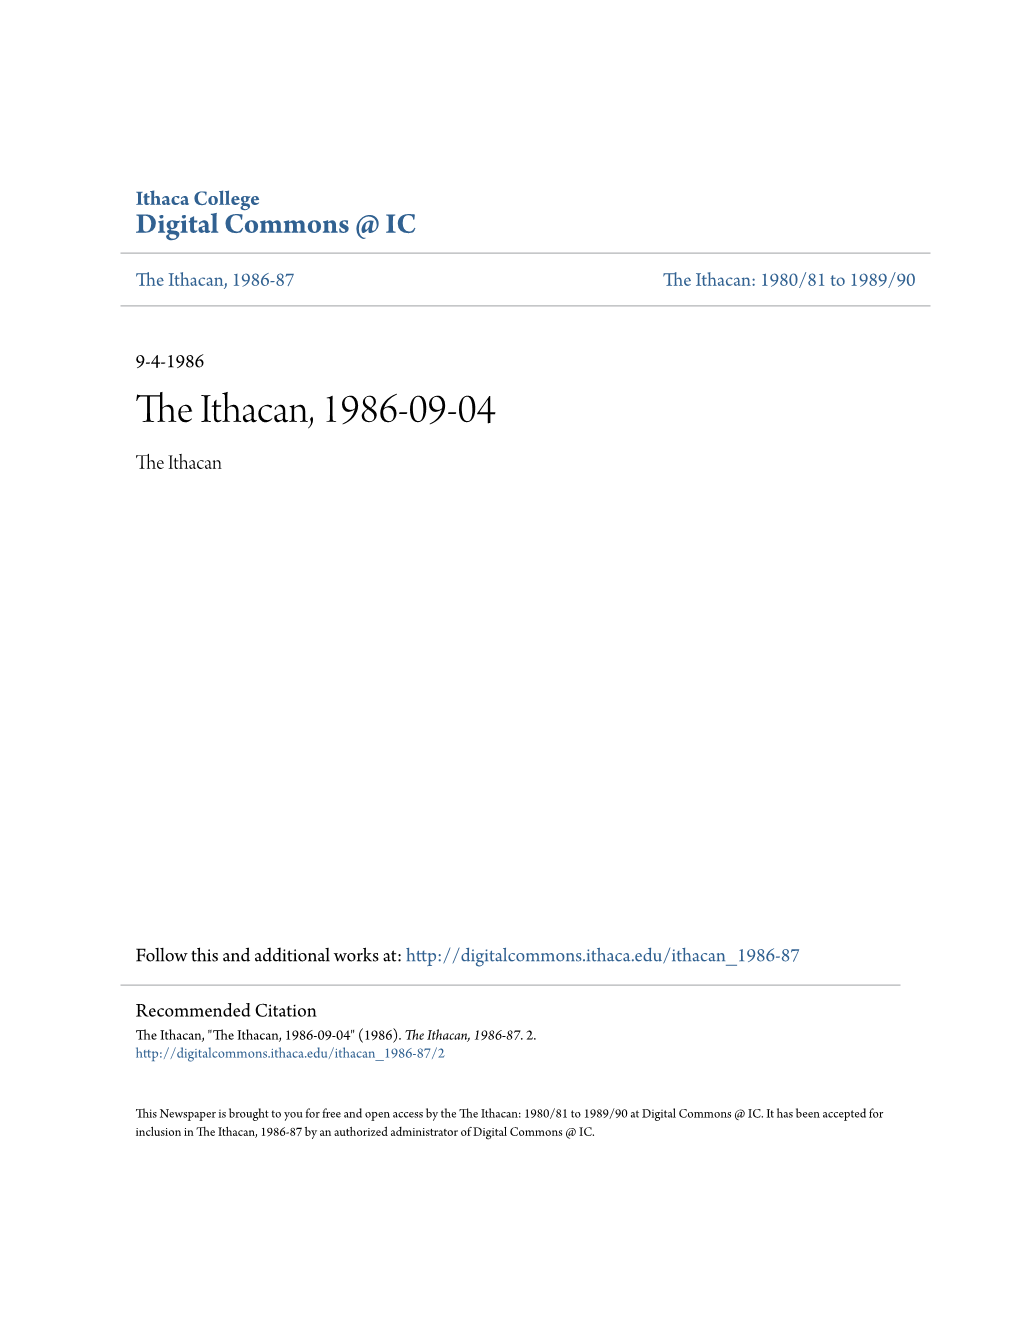 The Ithacan, 1986-09-04